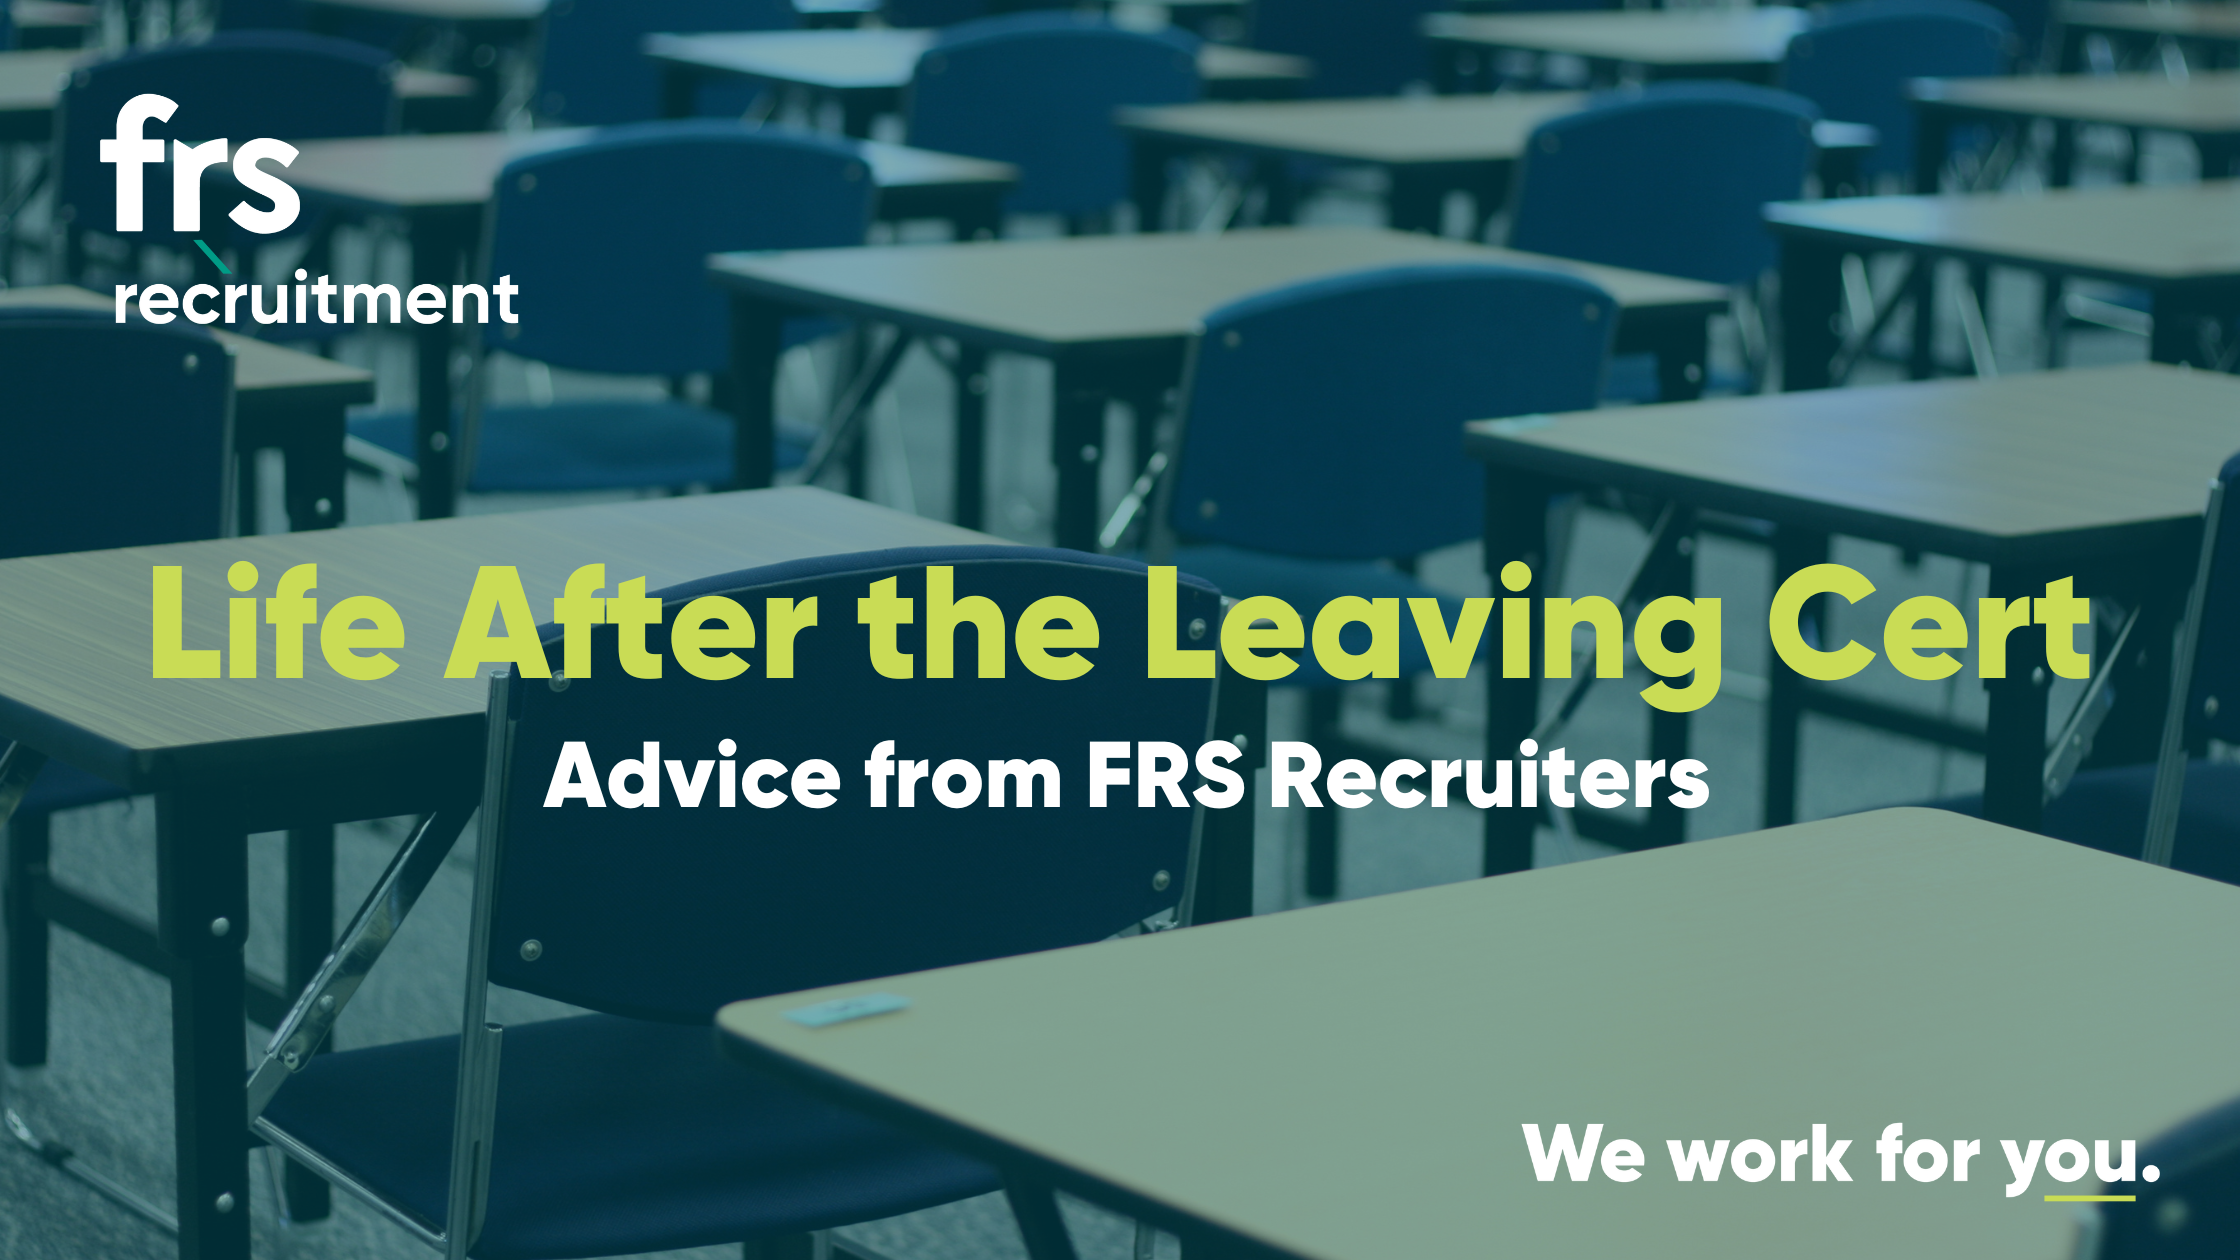 Life after the Leaving Cert - Advice from FRS Recruiters on what to do next